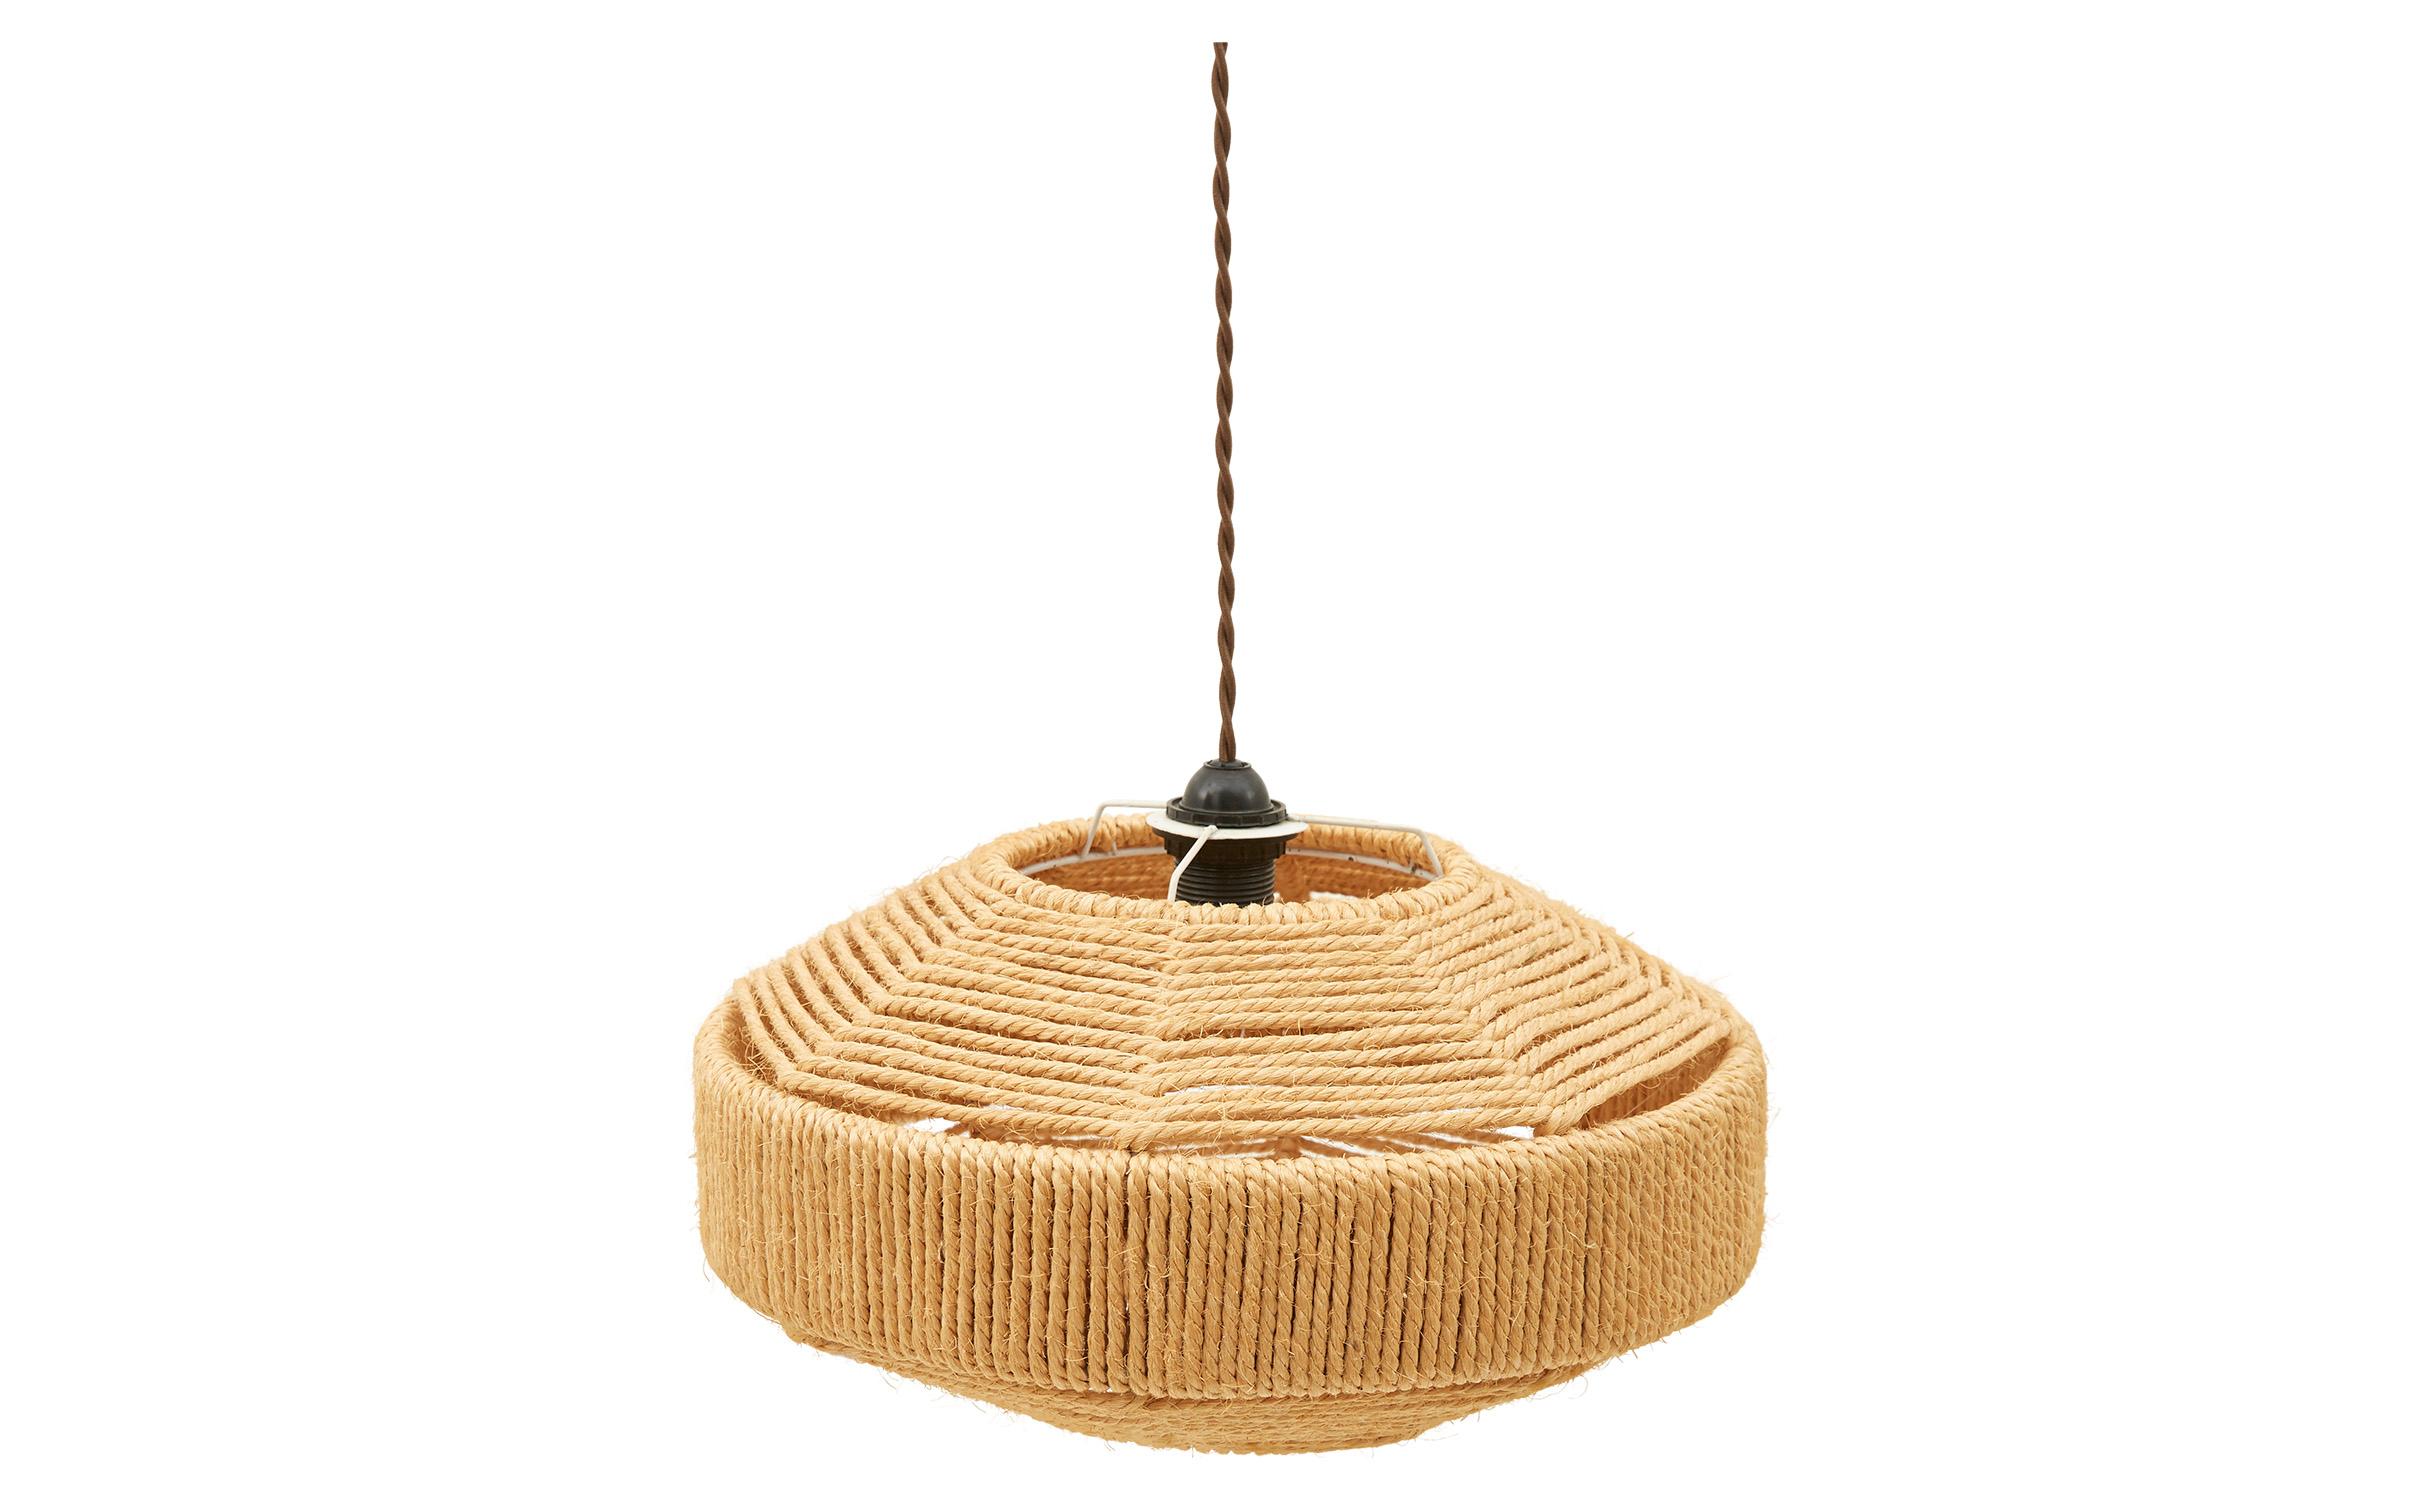 • Wrapped in natural jute rope
• Rewired with brown twisted rayon
• Brass canopy
• 20th century
• Spain

Dimensions
• 16